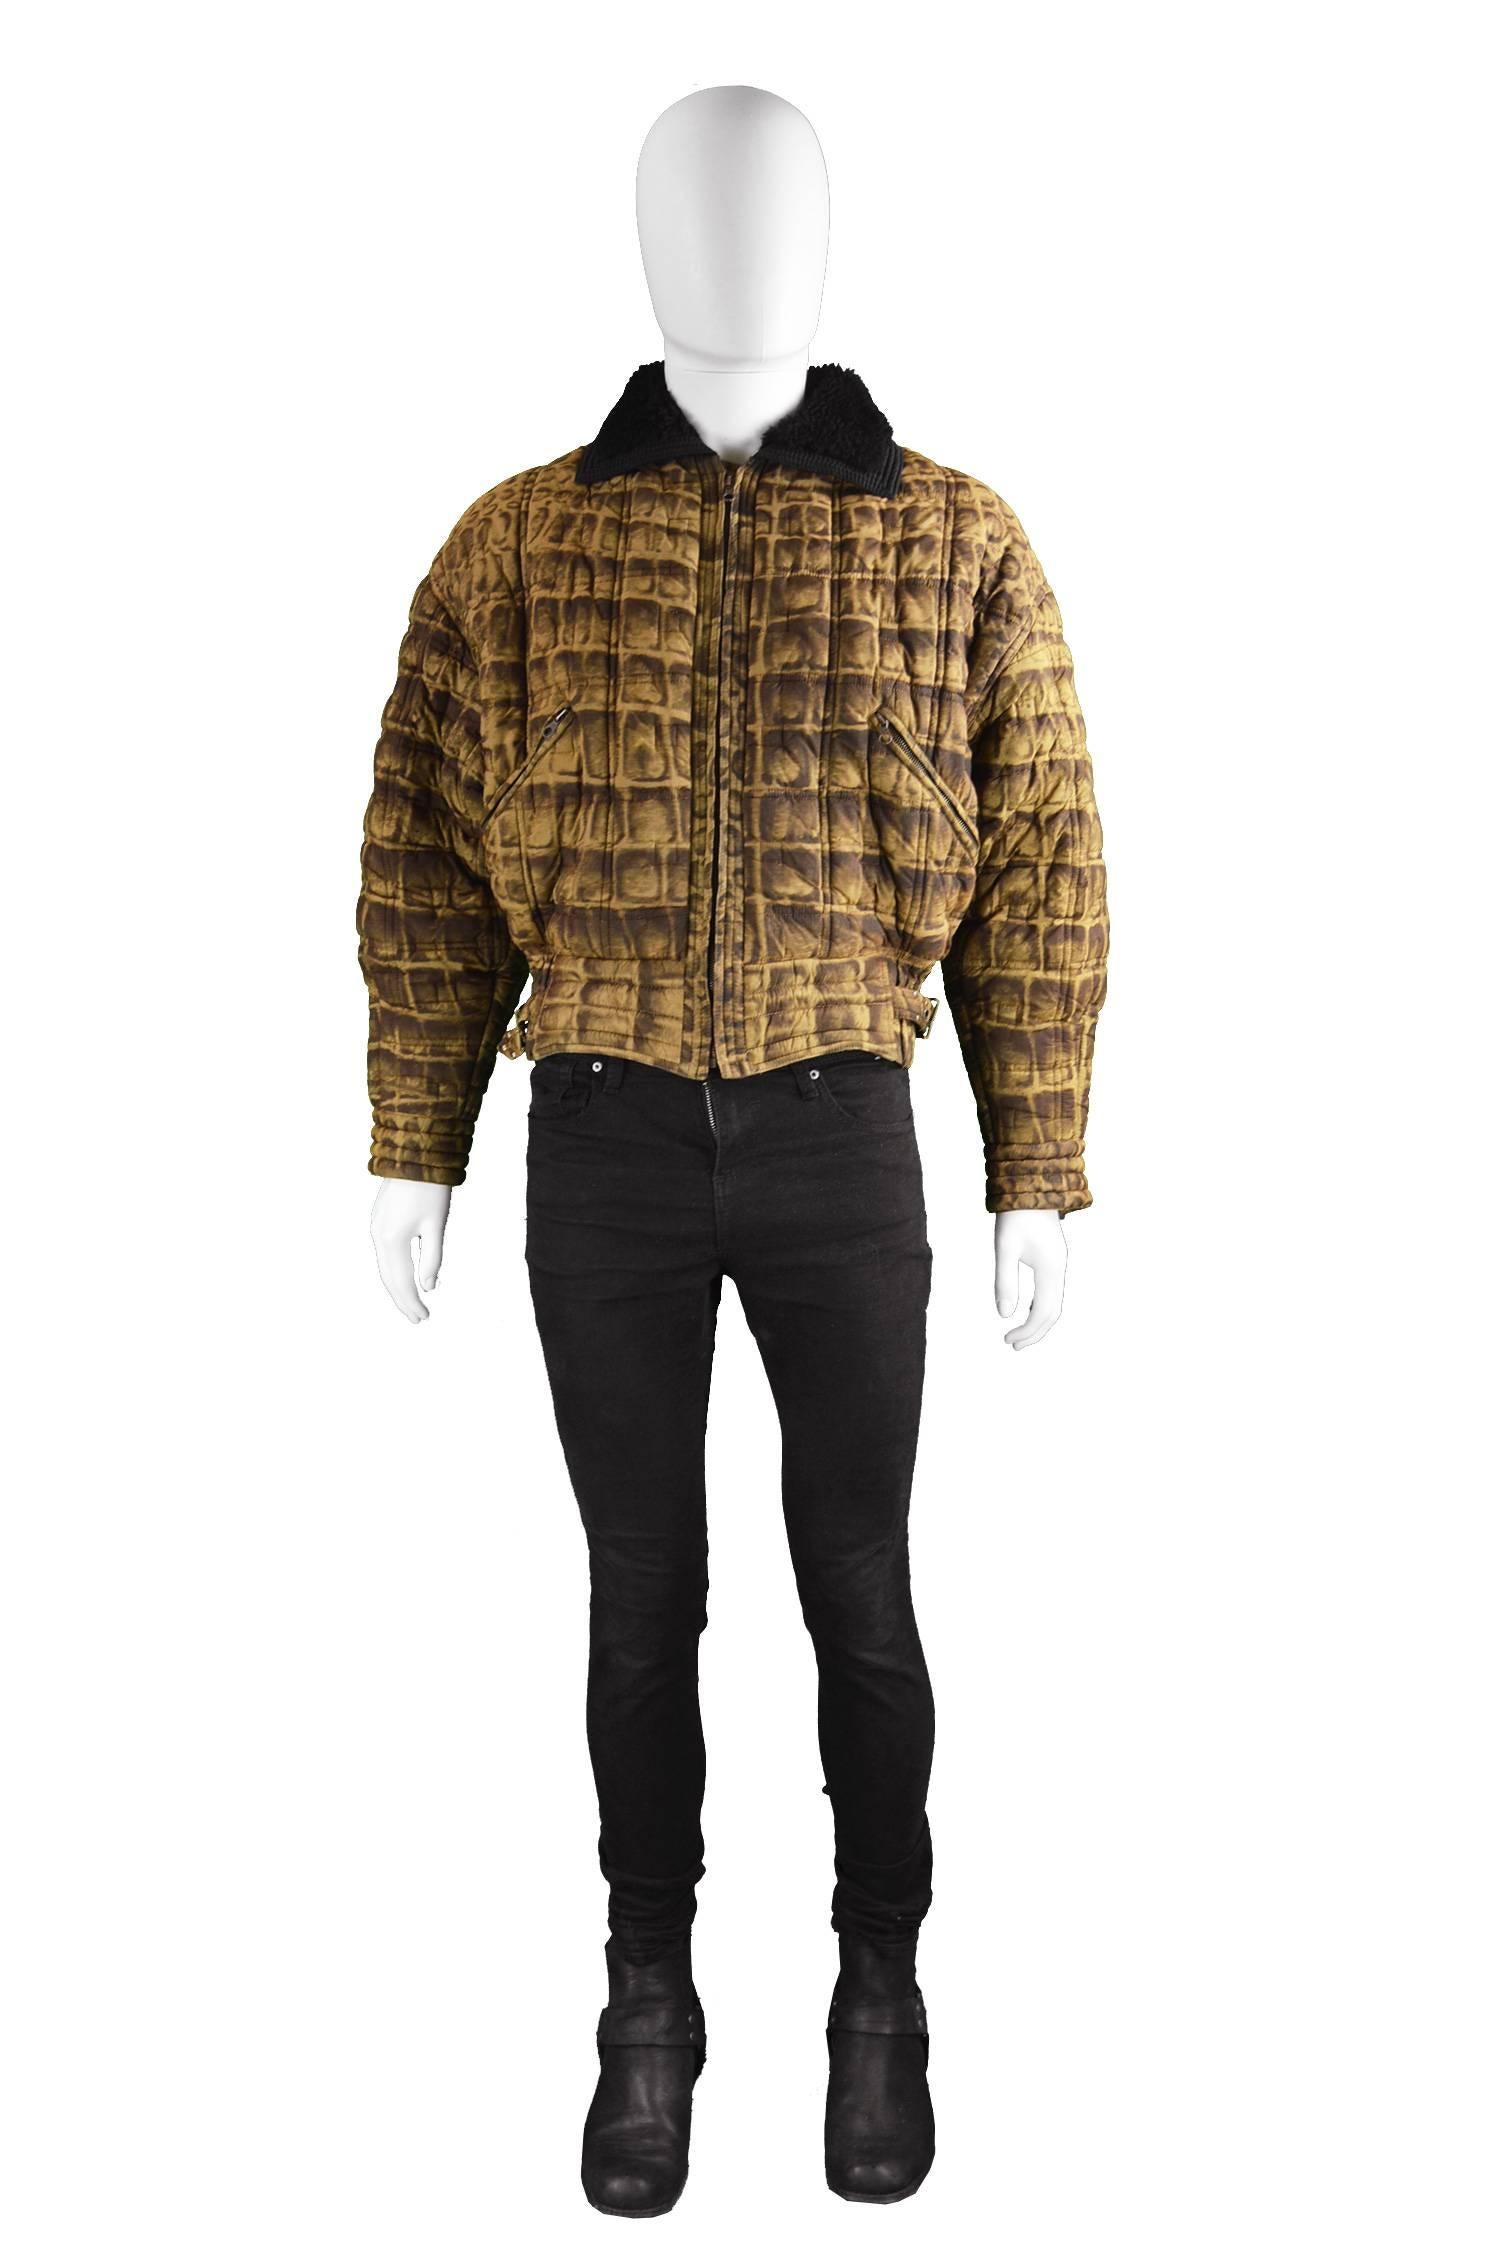 Gianni Versace Men's Quilted Puffer Coat with Shearling Collar, c. Fall 1992

Please Click +CONTINUE READING to see measurements, description and condition. 

Estimated Size: men's Medium to Large. Please check measurements. 
Chest - up to 48” /